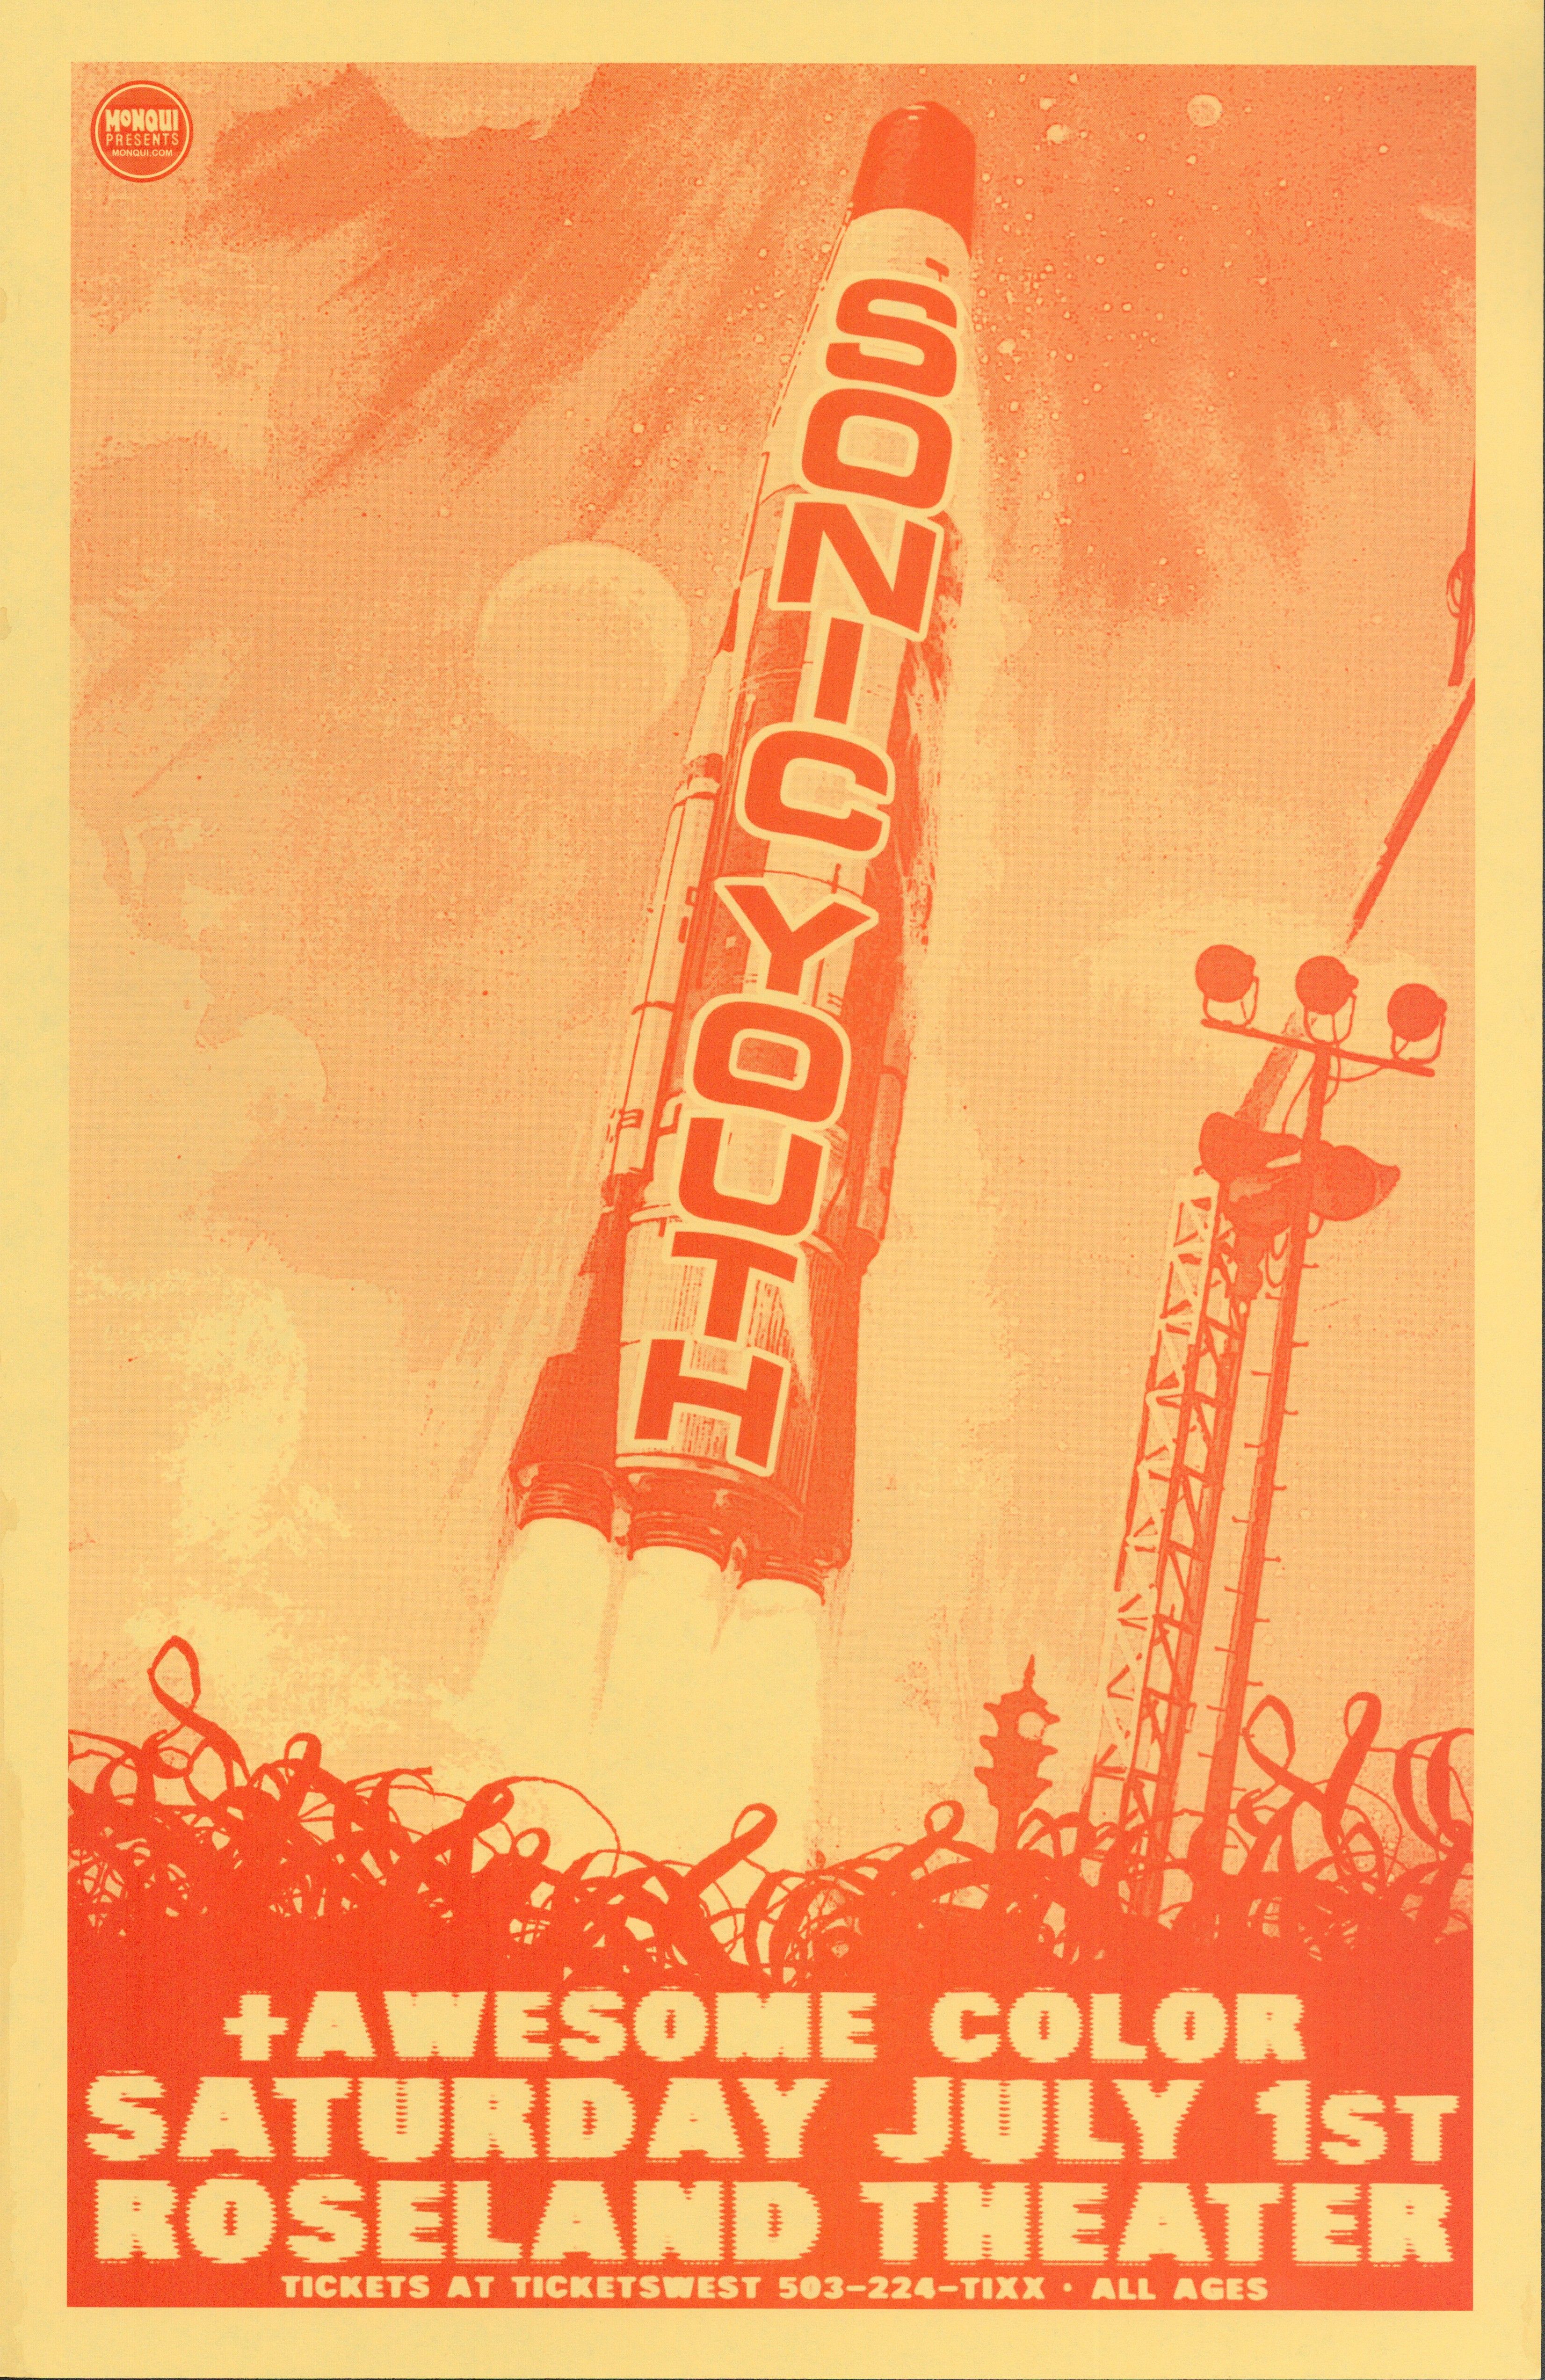 Sonic Youth Concert Poster Values - GoCollect (sonic-youth )